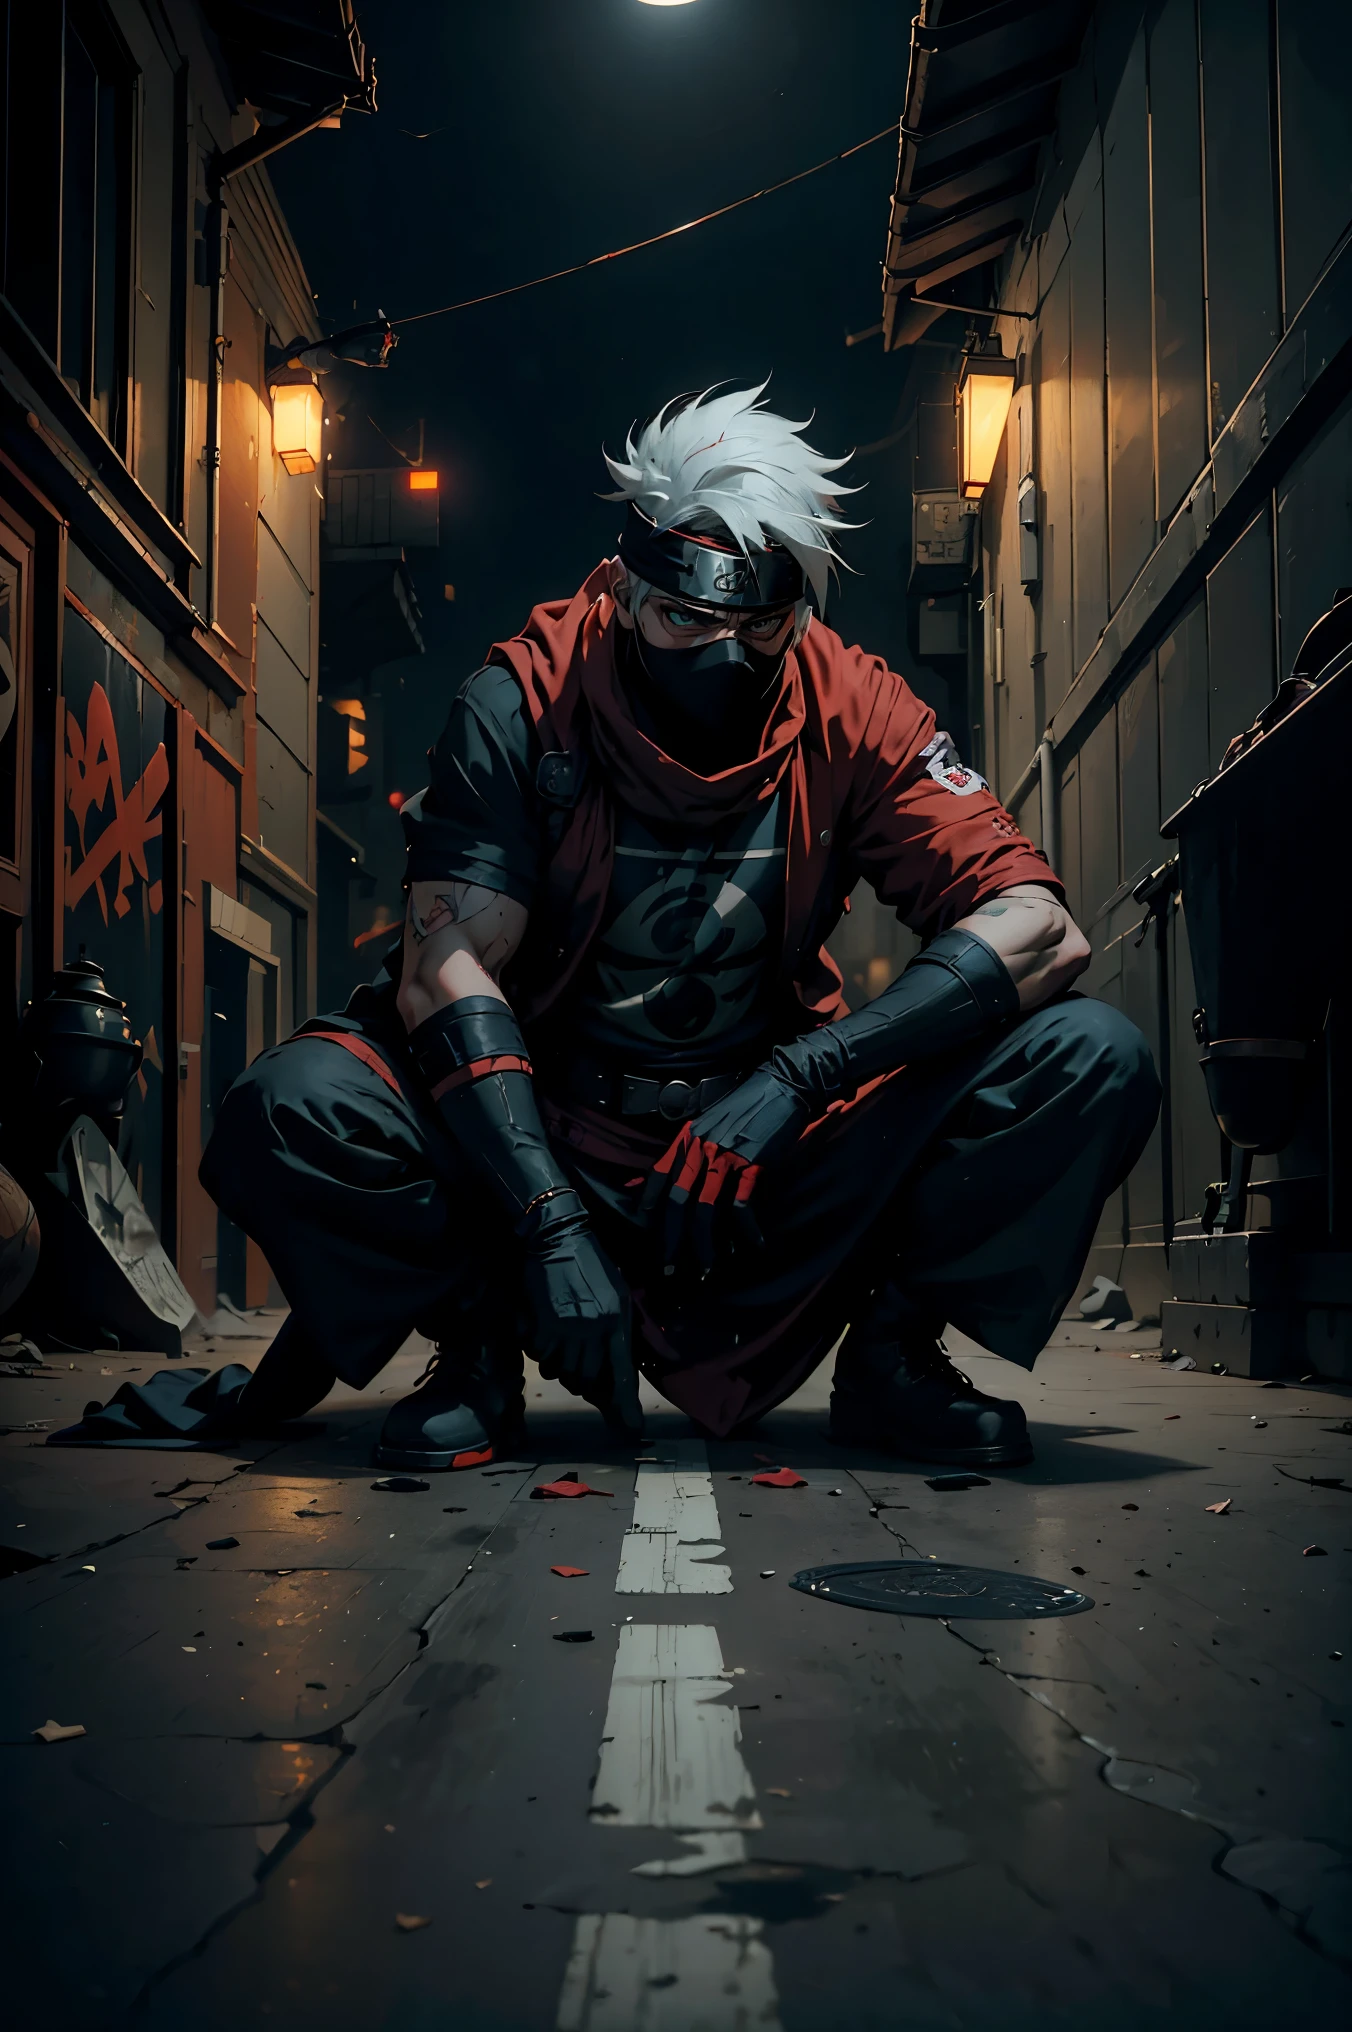 (best quality,4k,highres),Kakashi sitting on the ground with a street style, leaning against a wall, red Jordans, red ninja gloves, white hair, ninja headband, mask covering his mouth, graffiti background, vibrant colors, urban art style, edgy lighting